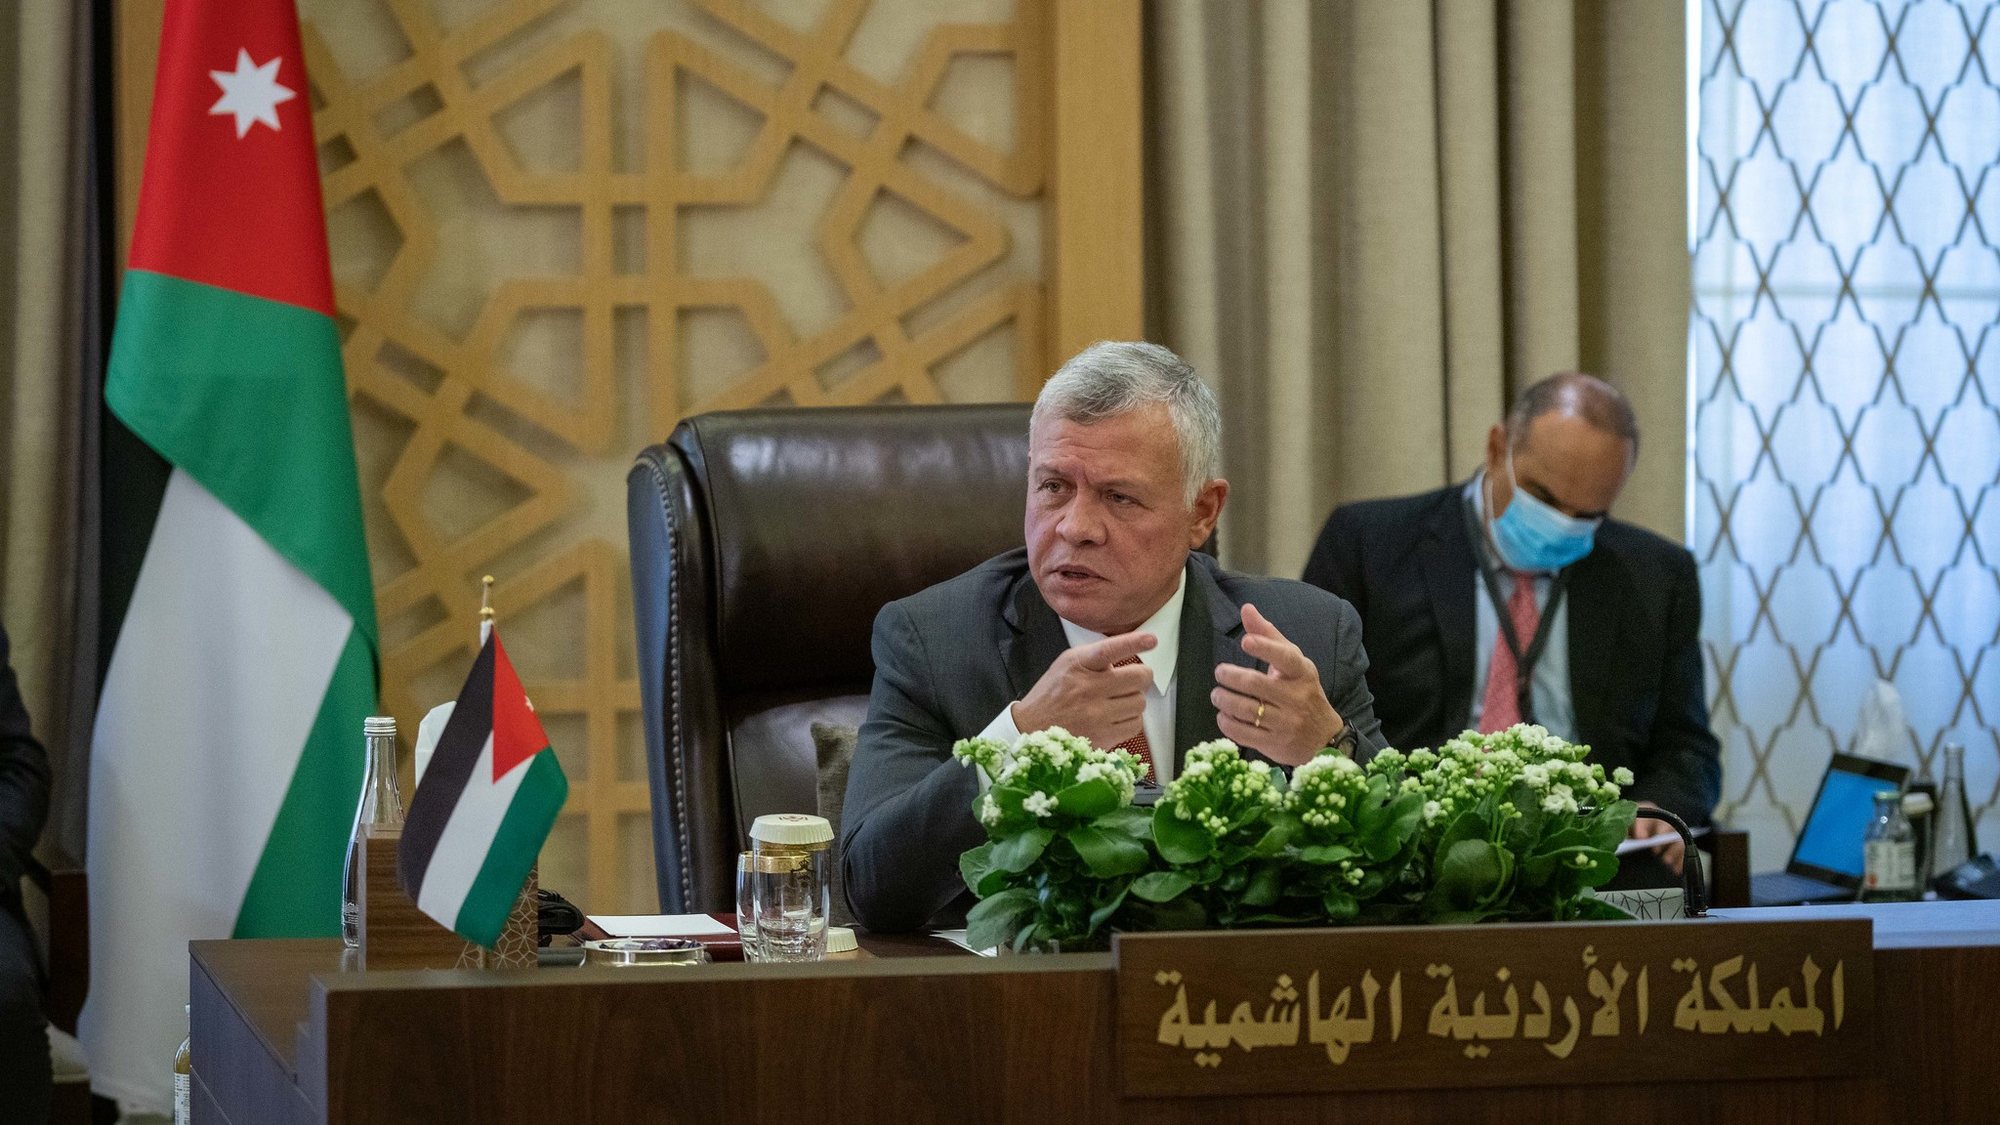 epa08624880 A handout photo made available by Royal Hashemite Court RHC shows King Abdullah II of Jordan talking during a trilateral meeting in Amman, Jordan, 25 August 2020.  EPA/ROYAL HASHEMITE COURT HANDOUT  HANDOUT EDITORIAL USE ONLY/NO SALES